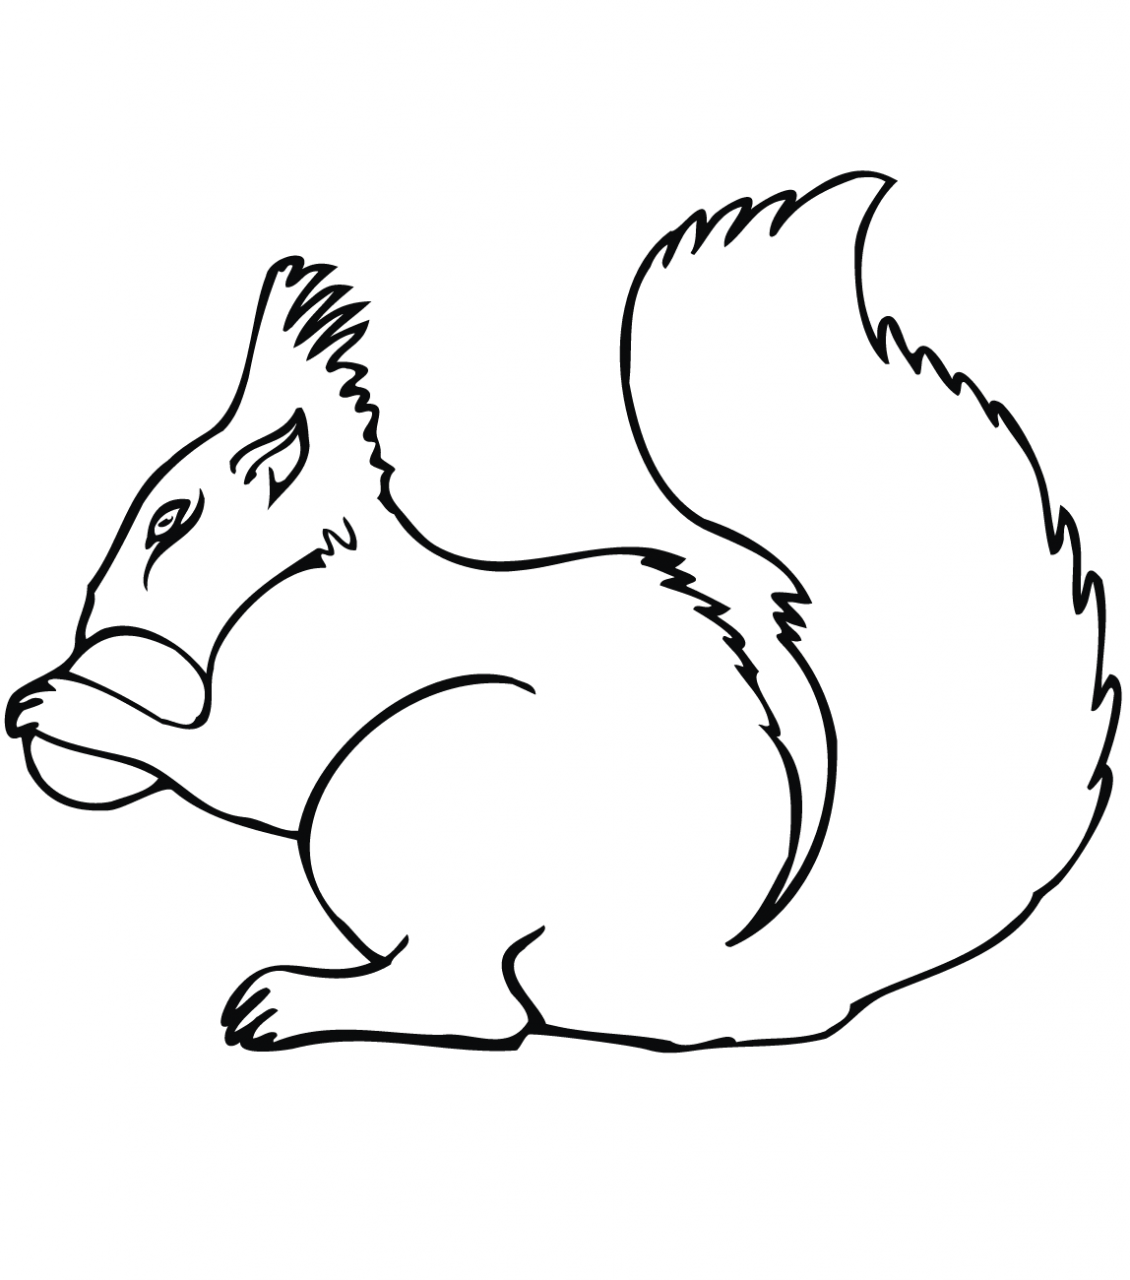 50 pictures of the most beautiful squirrels for children to tap to - 50+ best coloring pictures of squirrels for children to practice coloring